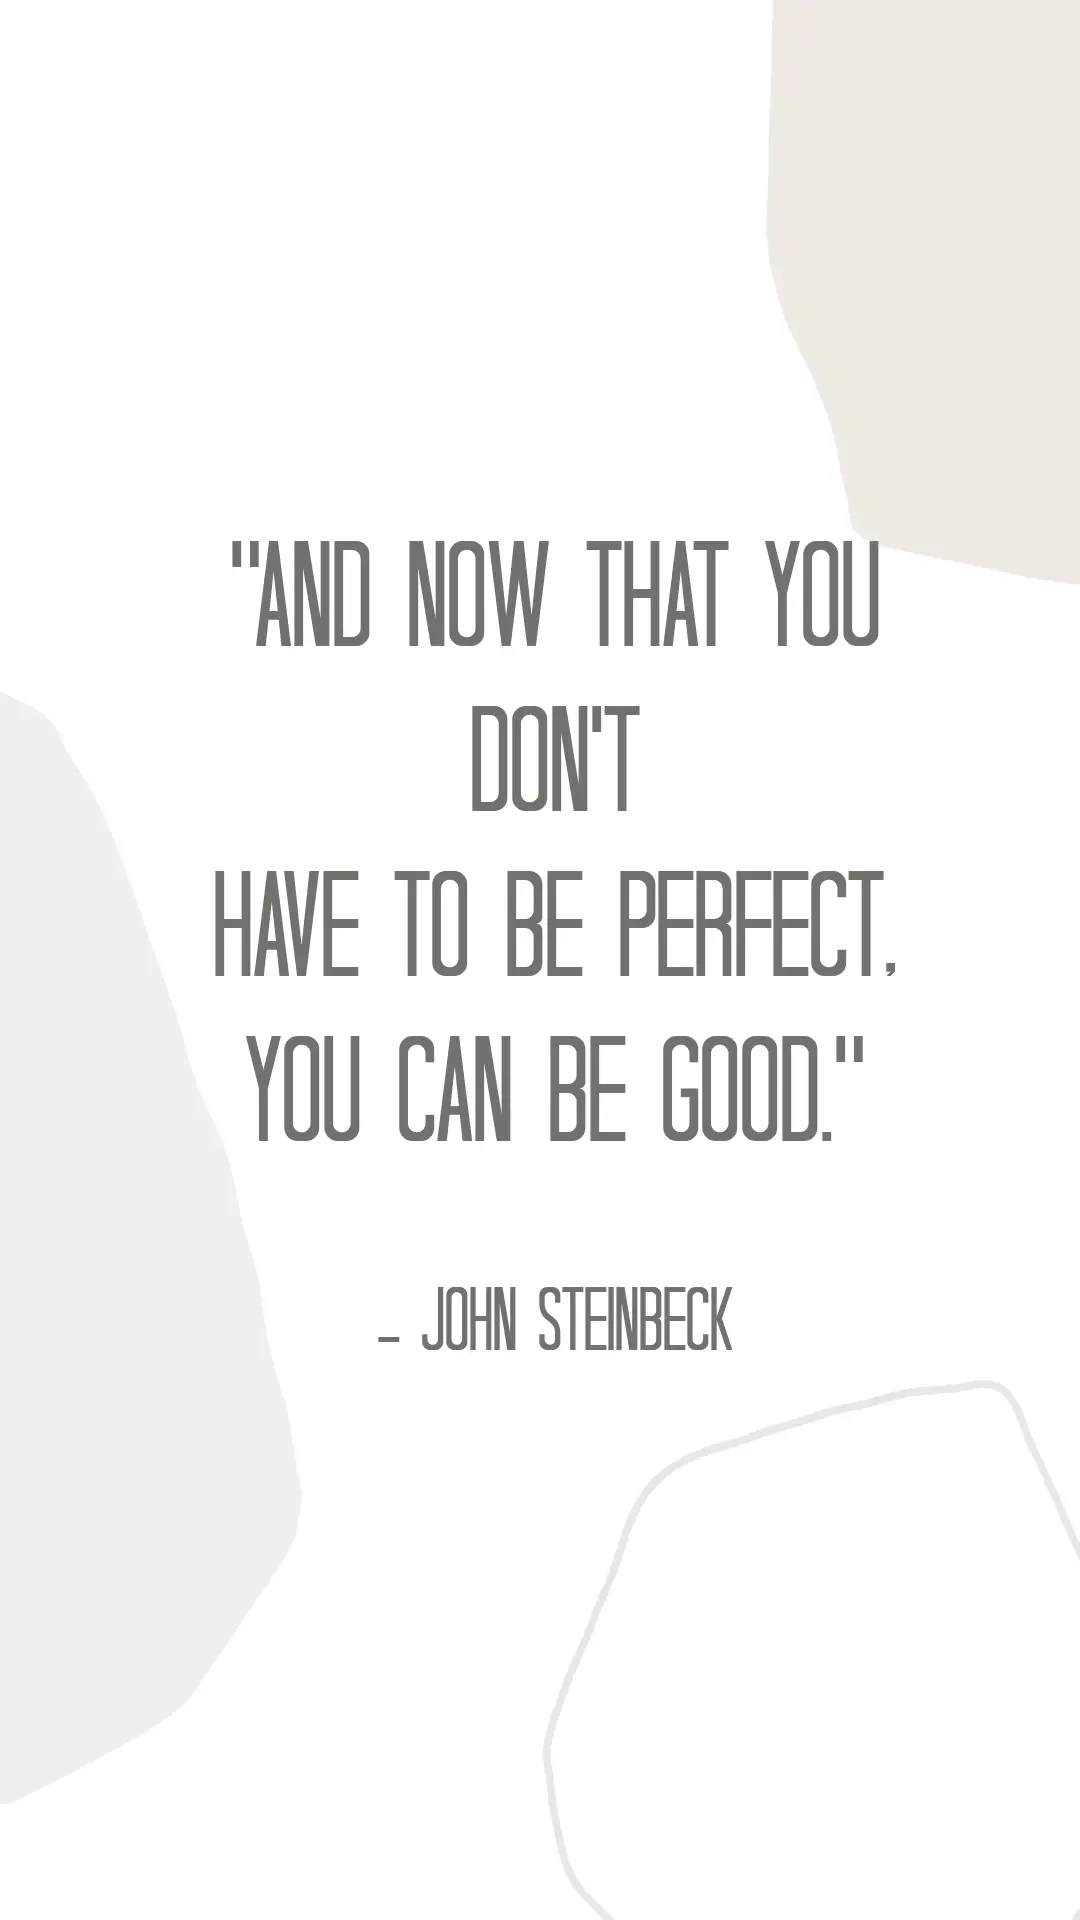 Stay At Home Mom Quotes - And now that you don't have to be perfect. You can be good - John Steinbeck